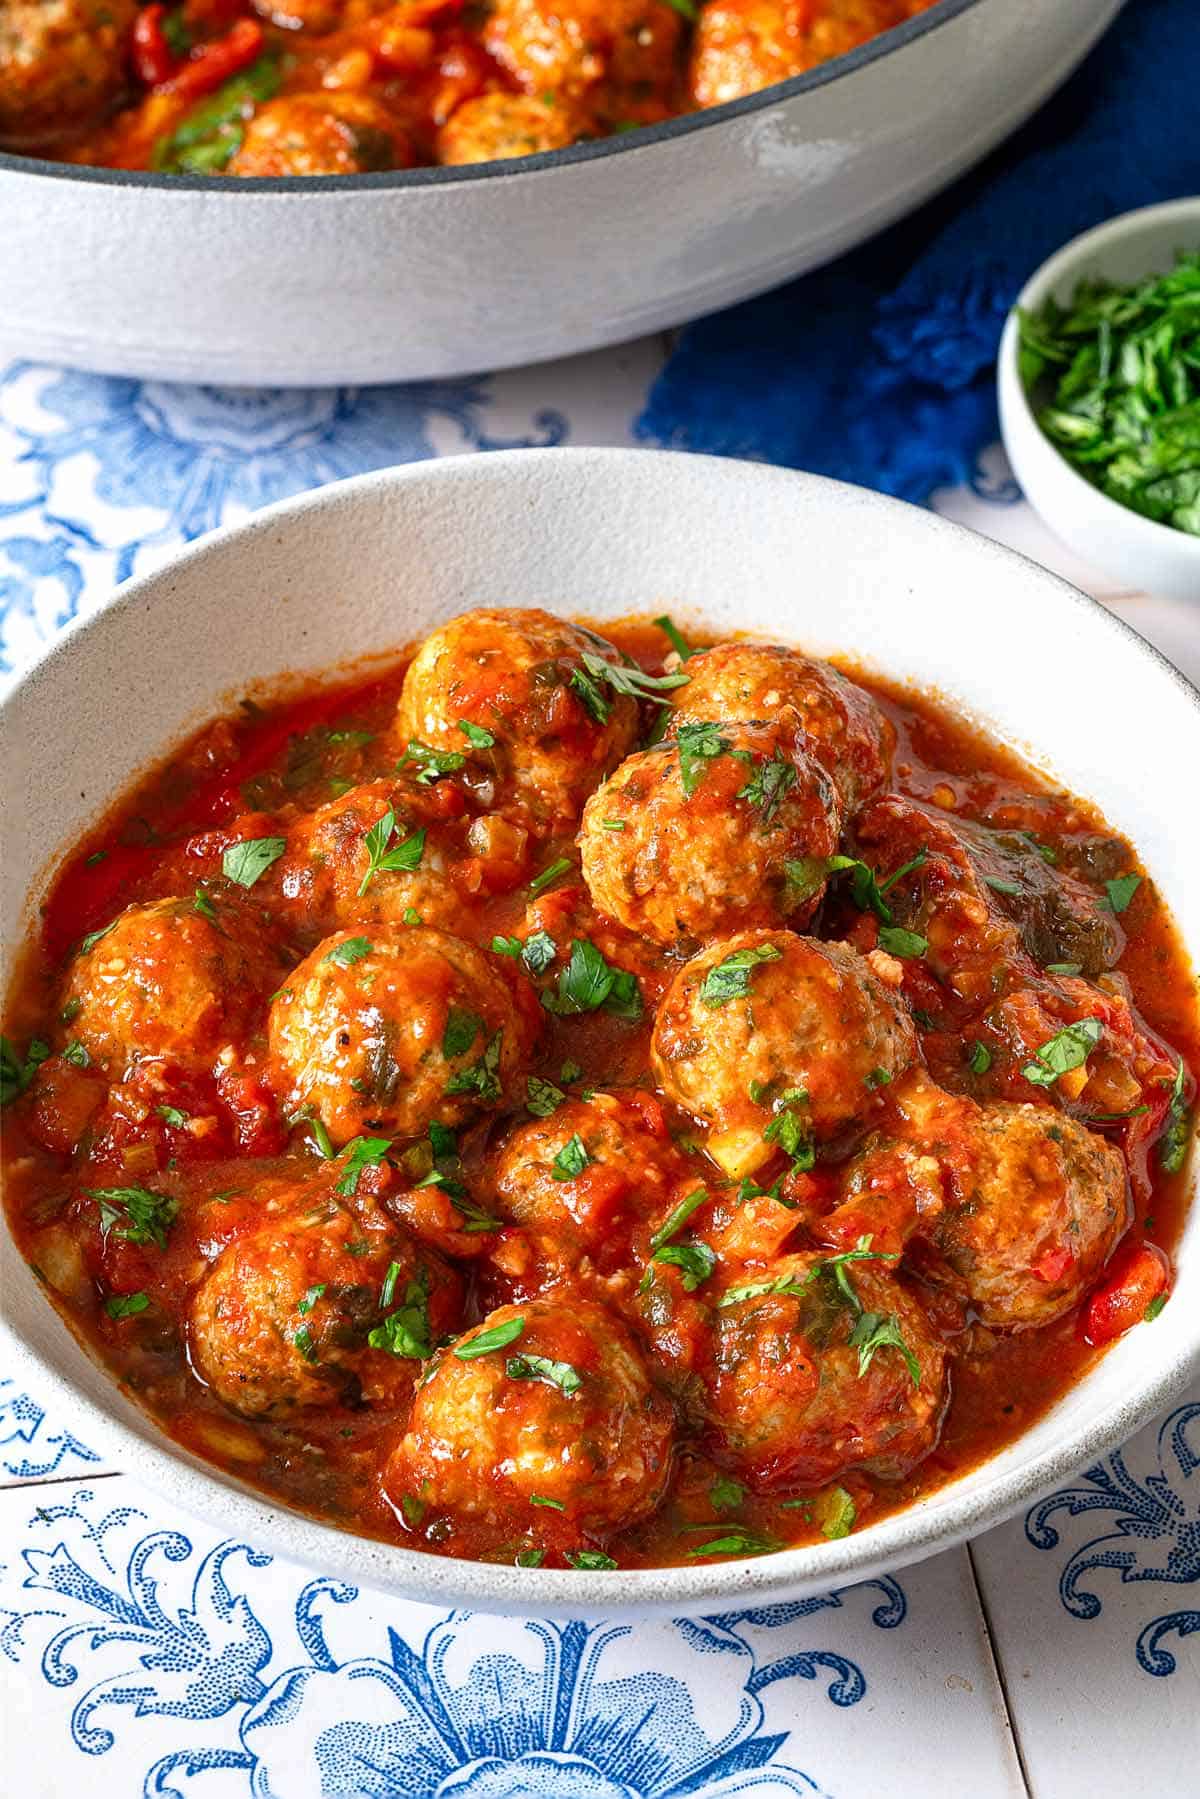 a serving of moroccan fish kofta in a bowl next to the pot of the kofta and a small bowl of parsley.